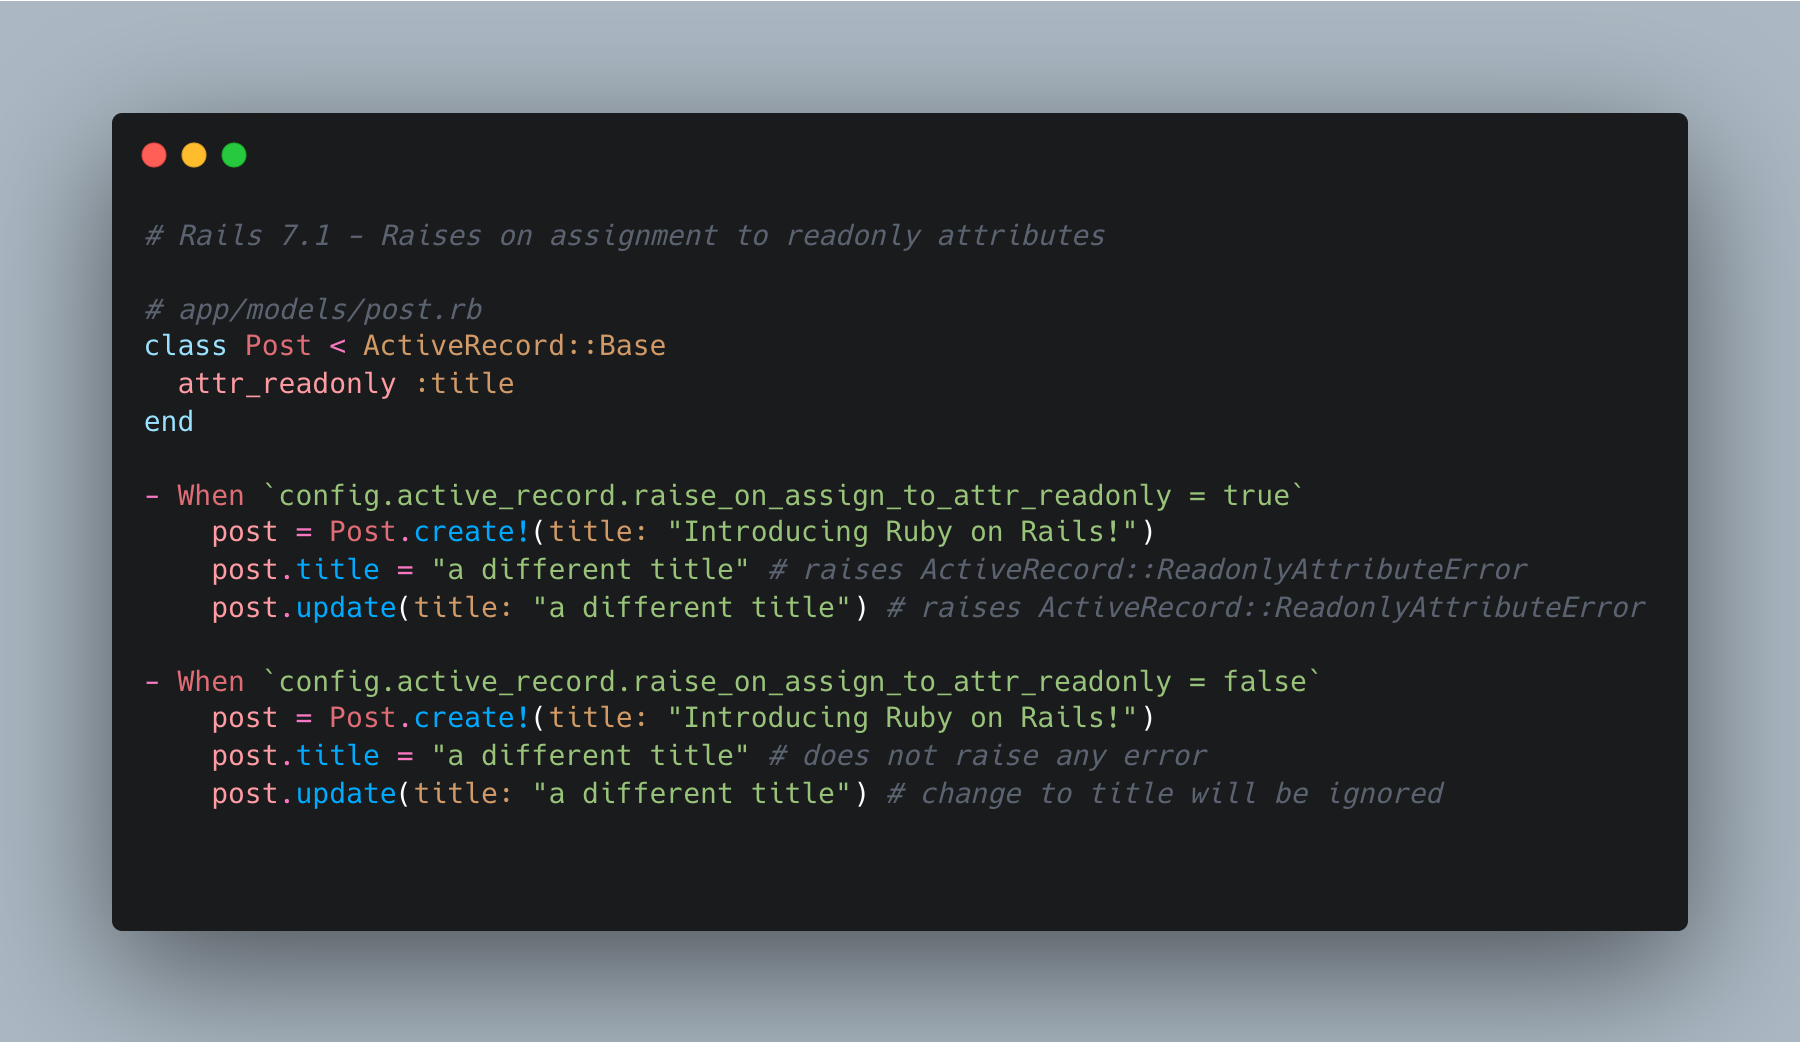 Rails 7.1 - Raises on assignment to readonly attributes